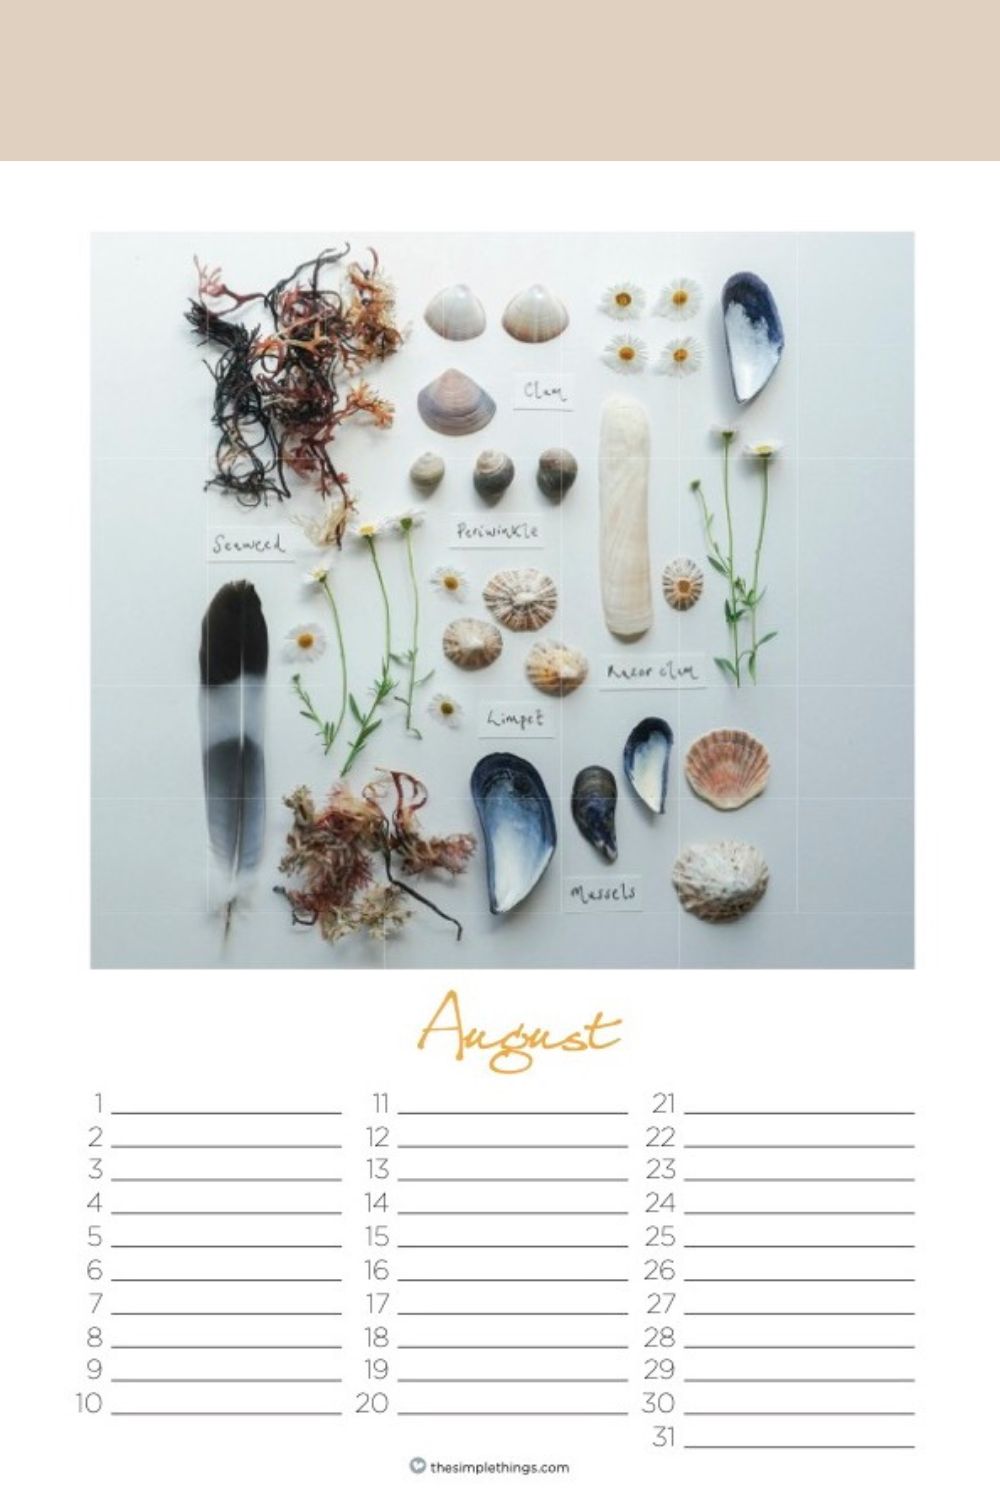 The Simple Things Nature Tables Calendar